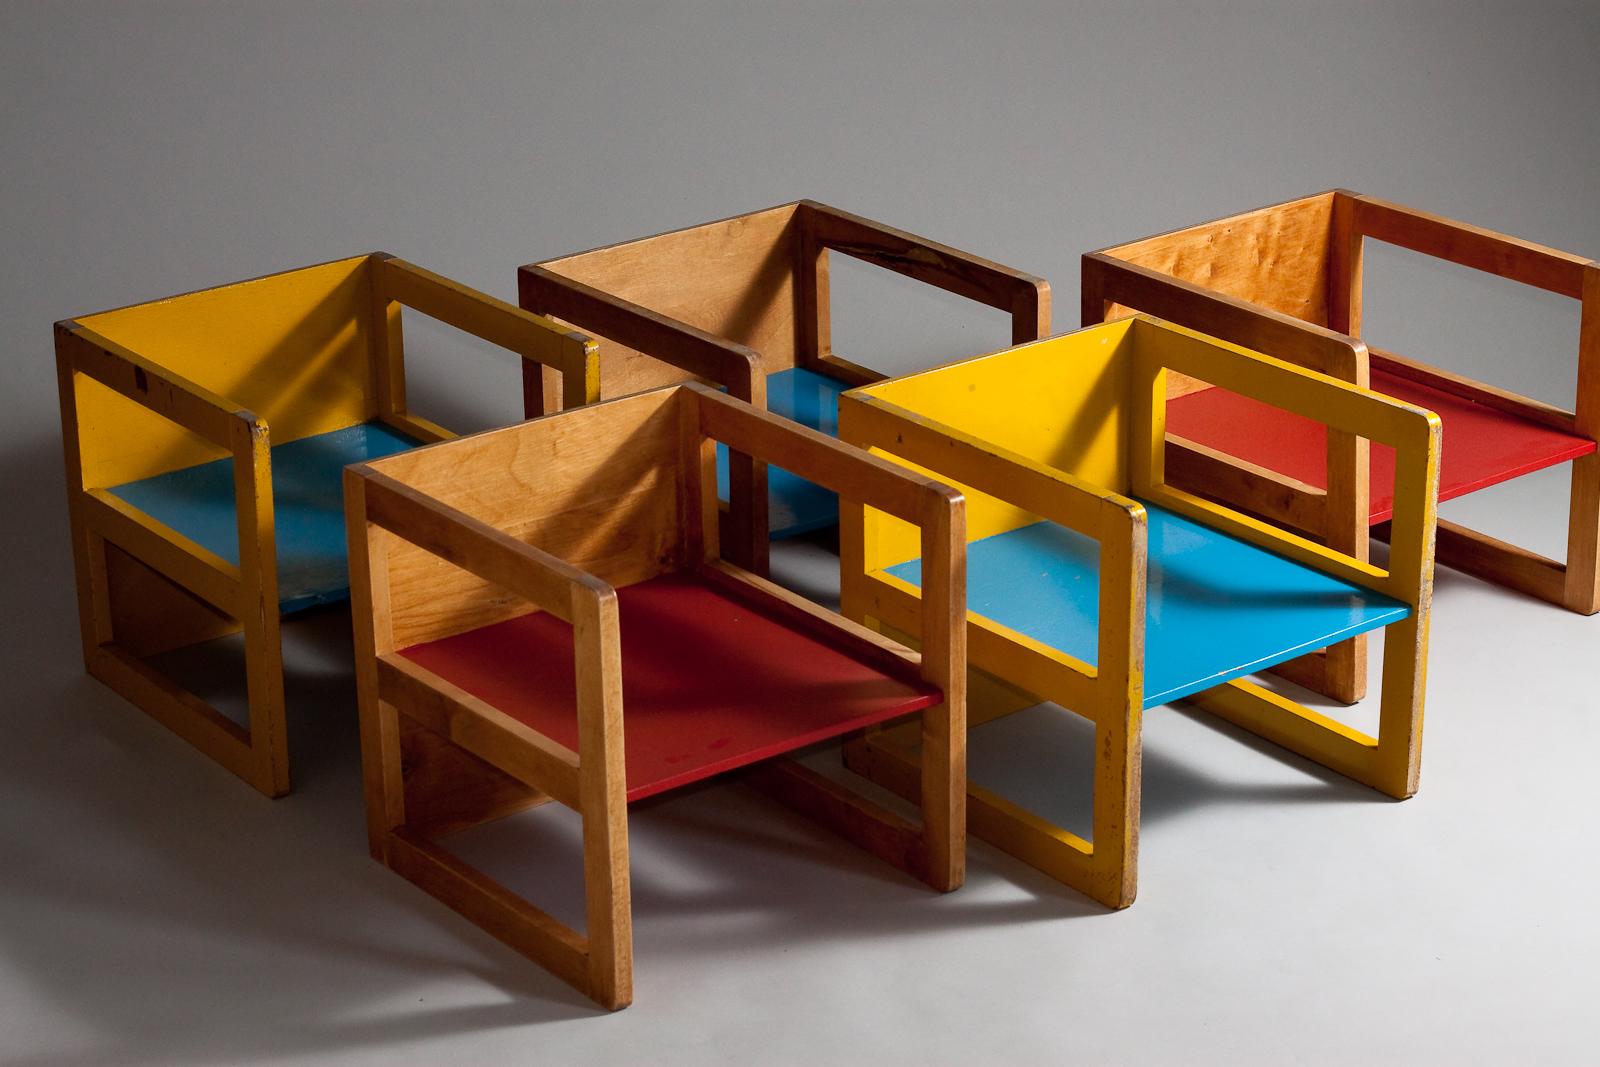 This rare set of 5 children's chairs, designed by Aino Aalto in the 1940s, features a timeless and classic design that could also be used as tables. With its Montessori inspired design, these Aino Aalto chairs are a rare find and perfect addition to